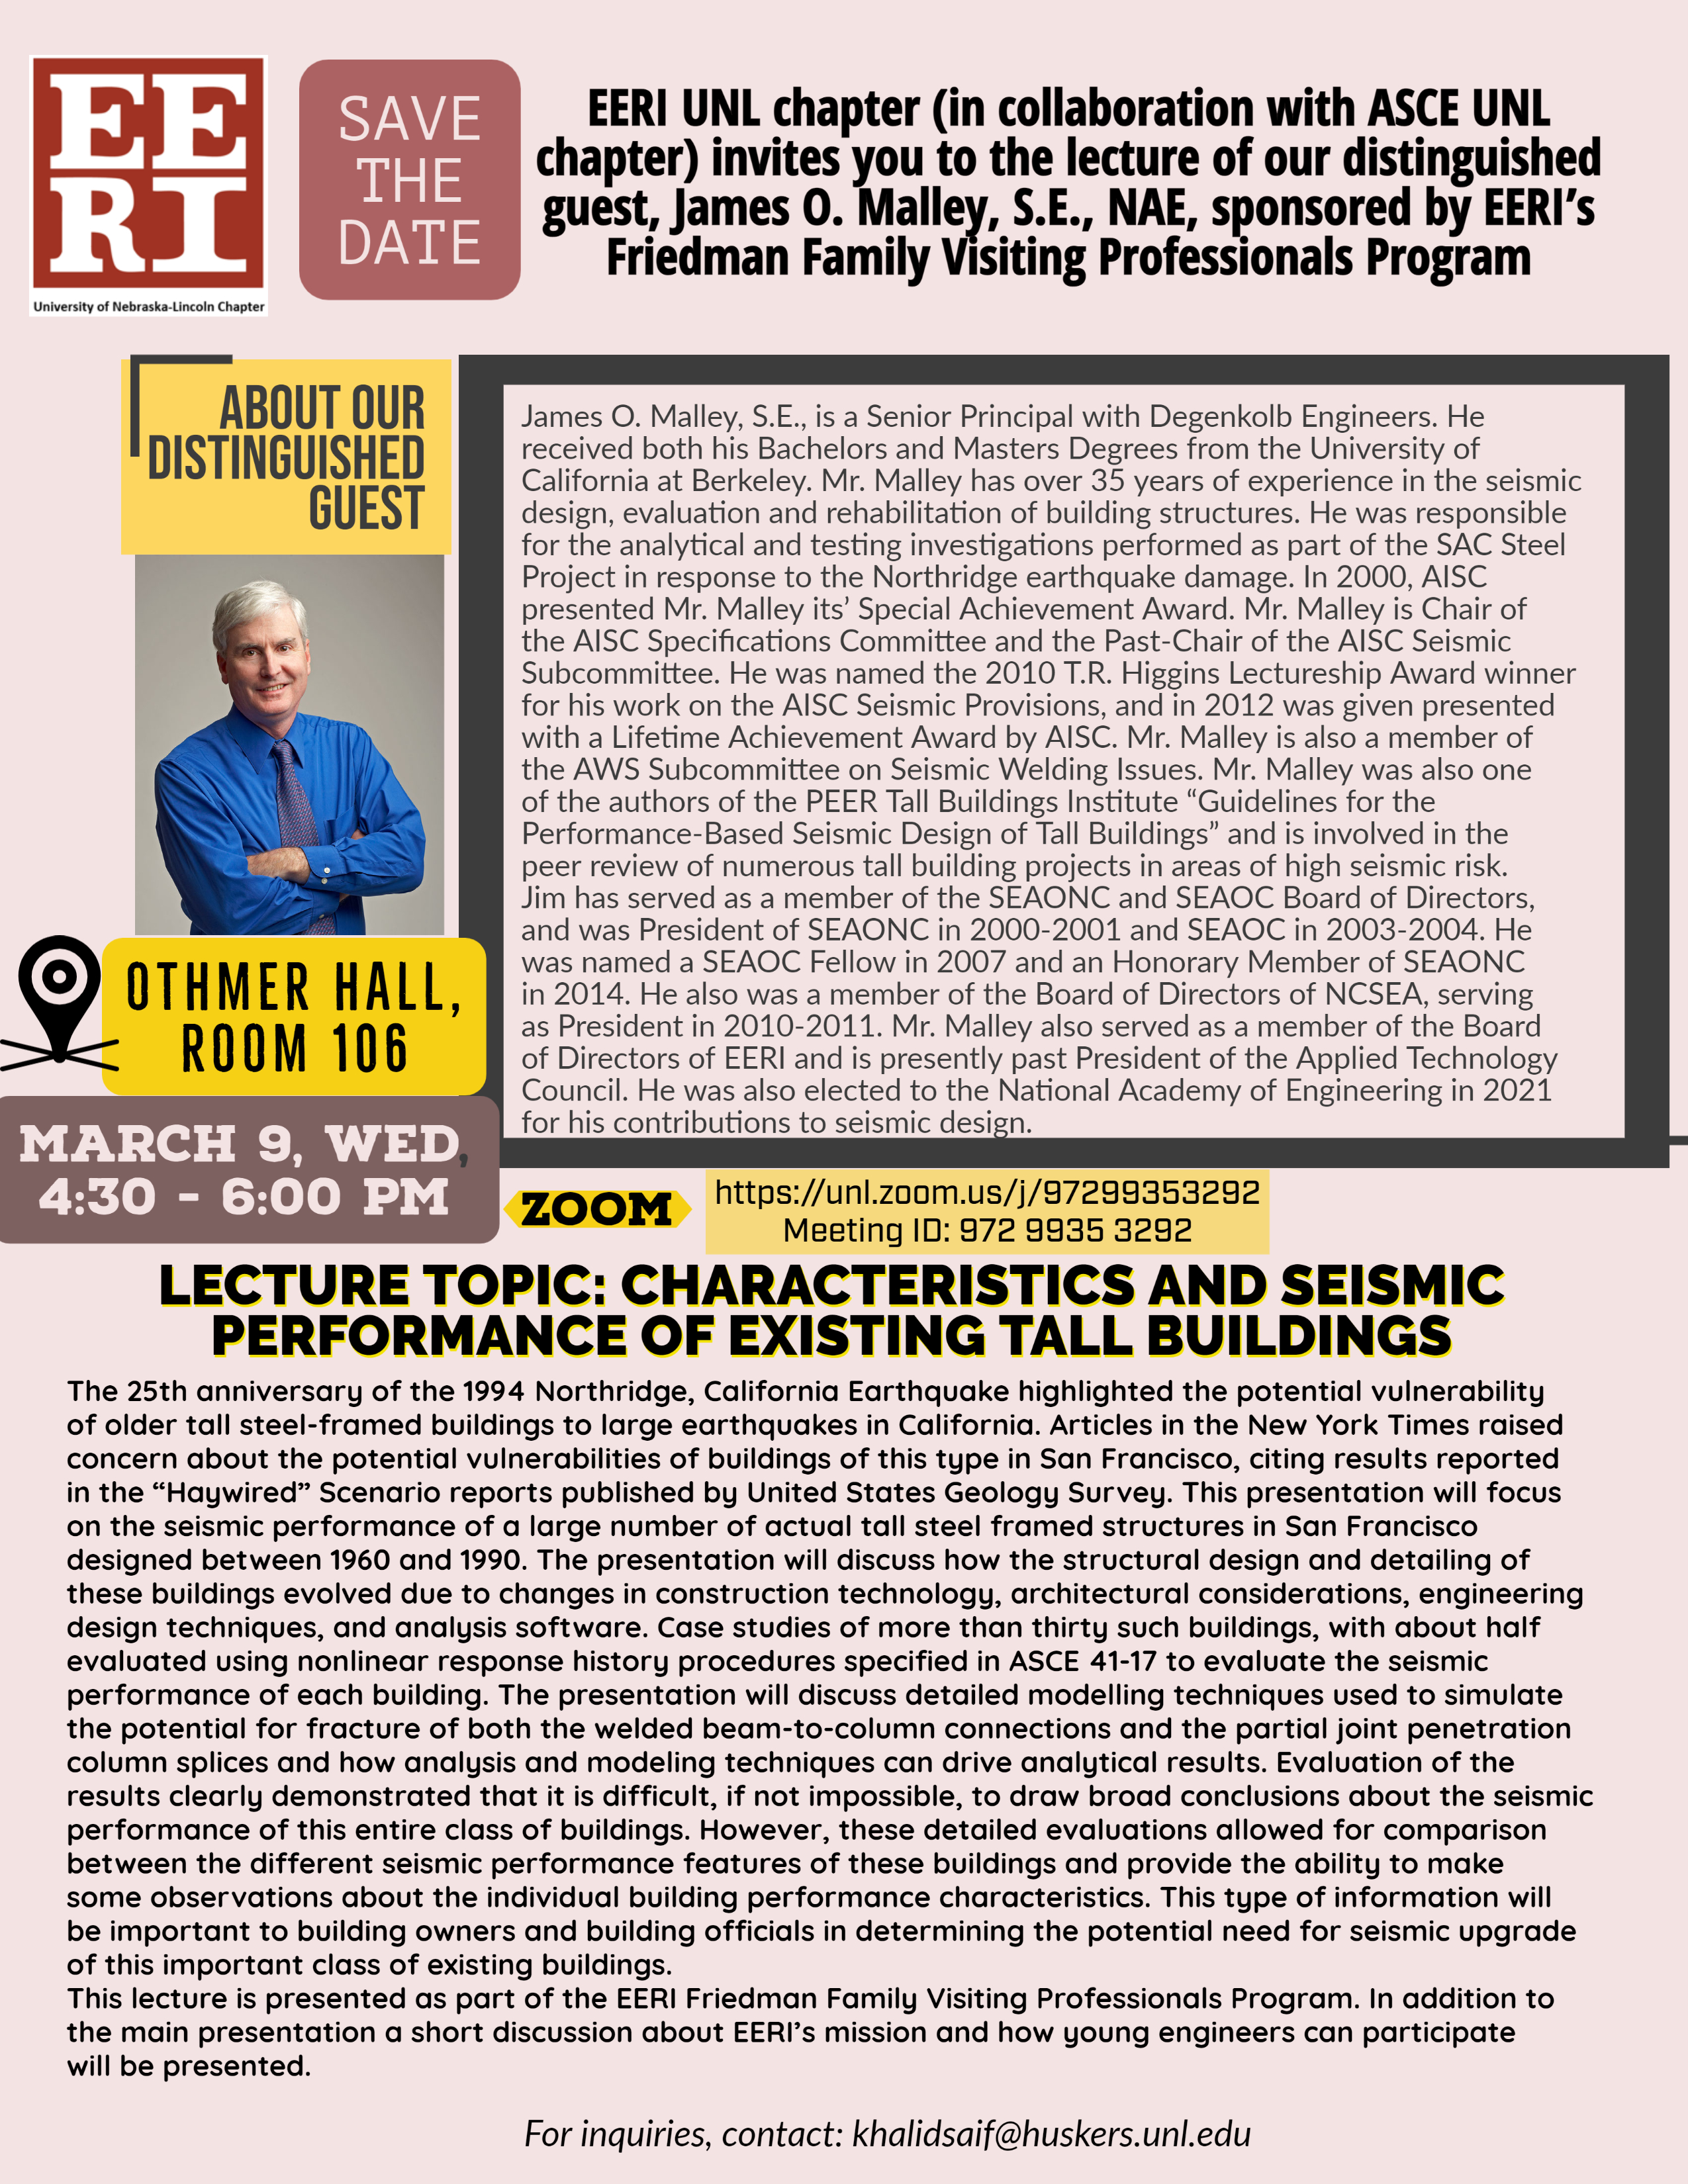 EERI UNL Chapter invited you to the lecture of James O. Malley